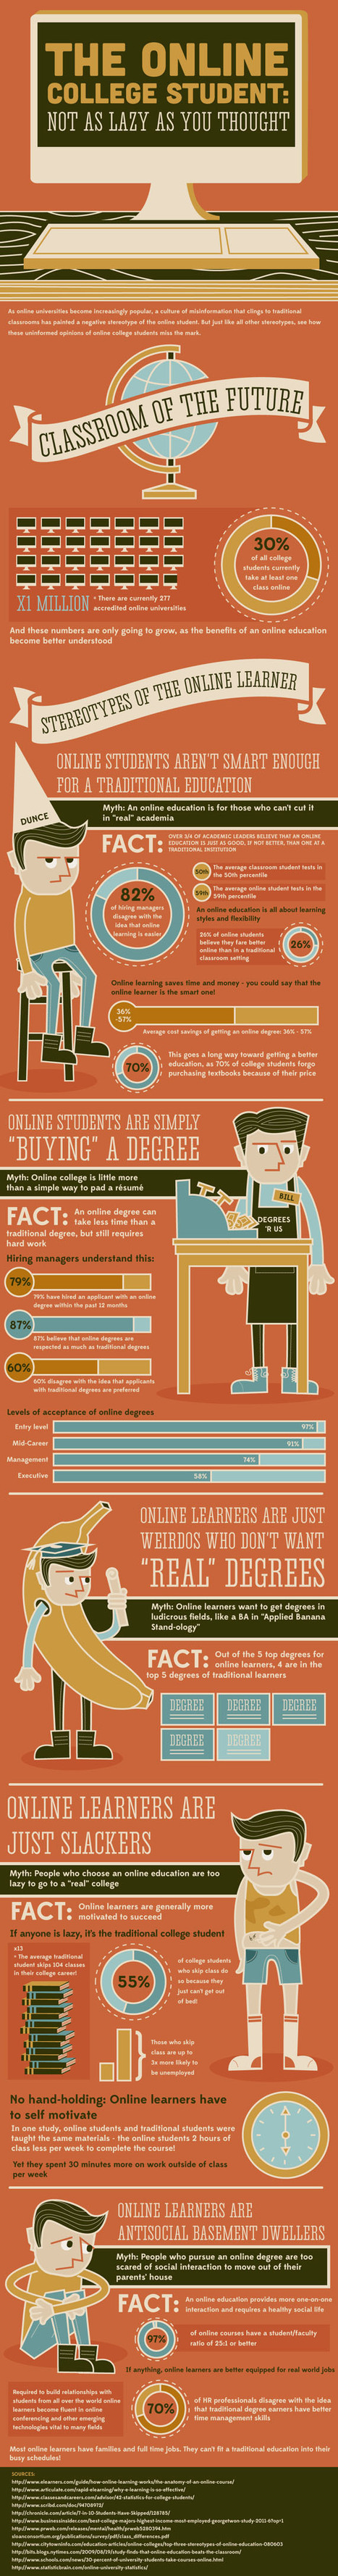 Do you have the wrong impression about online learning? [Infographic] | Didactics and Technology in Education | Scoop.it